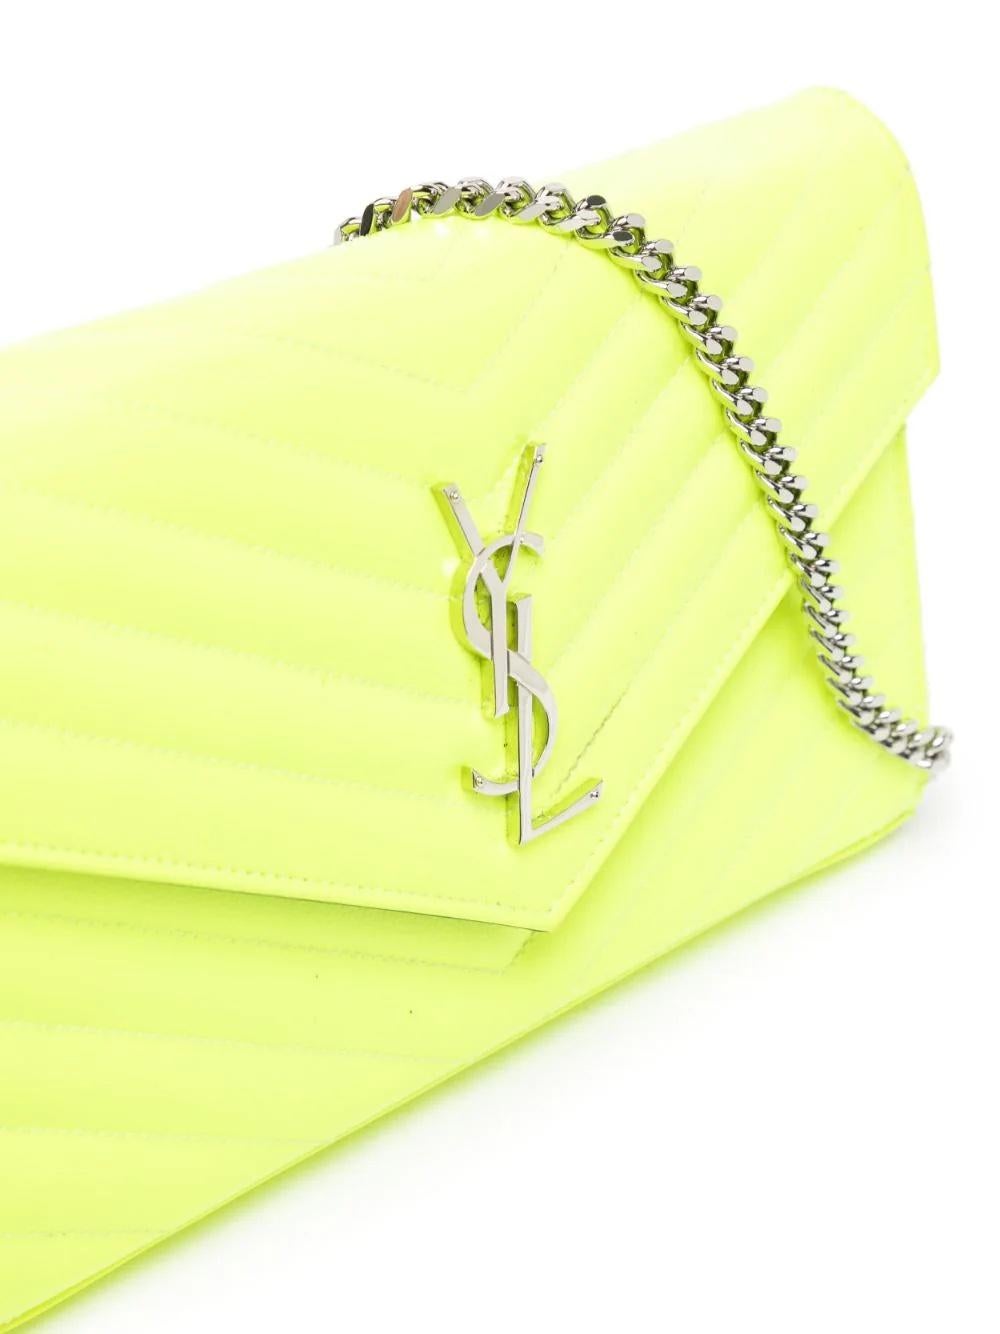 * Neon yellow
* Patent leather
* Signature V-stitch quilting
* Signature YSL logo plaque
* Foldover top with press-stud fastening
* Detachable chain-link shoulder strap
* Internal card slots
* Internal zip-fastening pocket
* Internal logo stamp
*